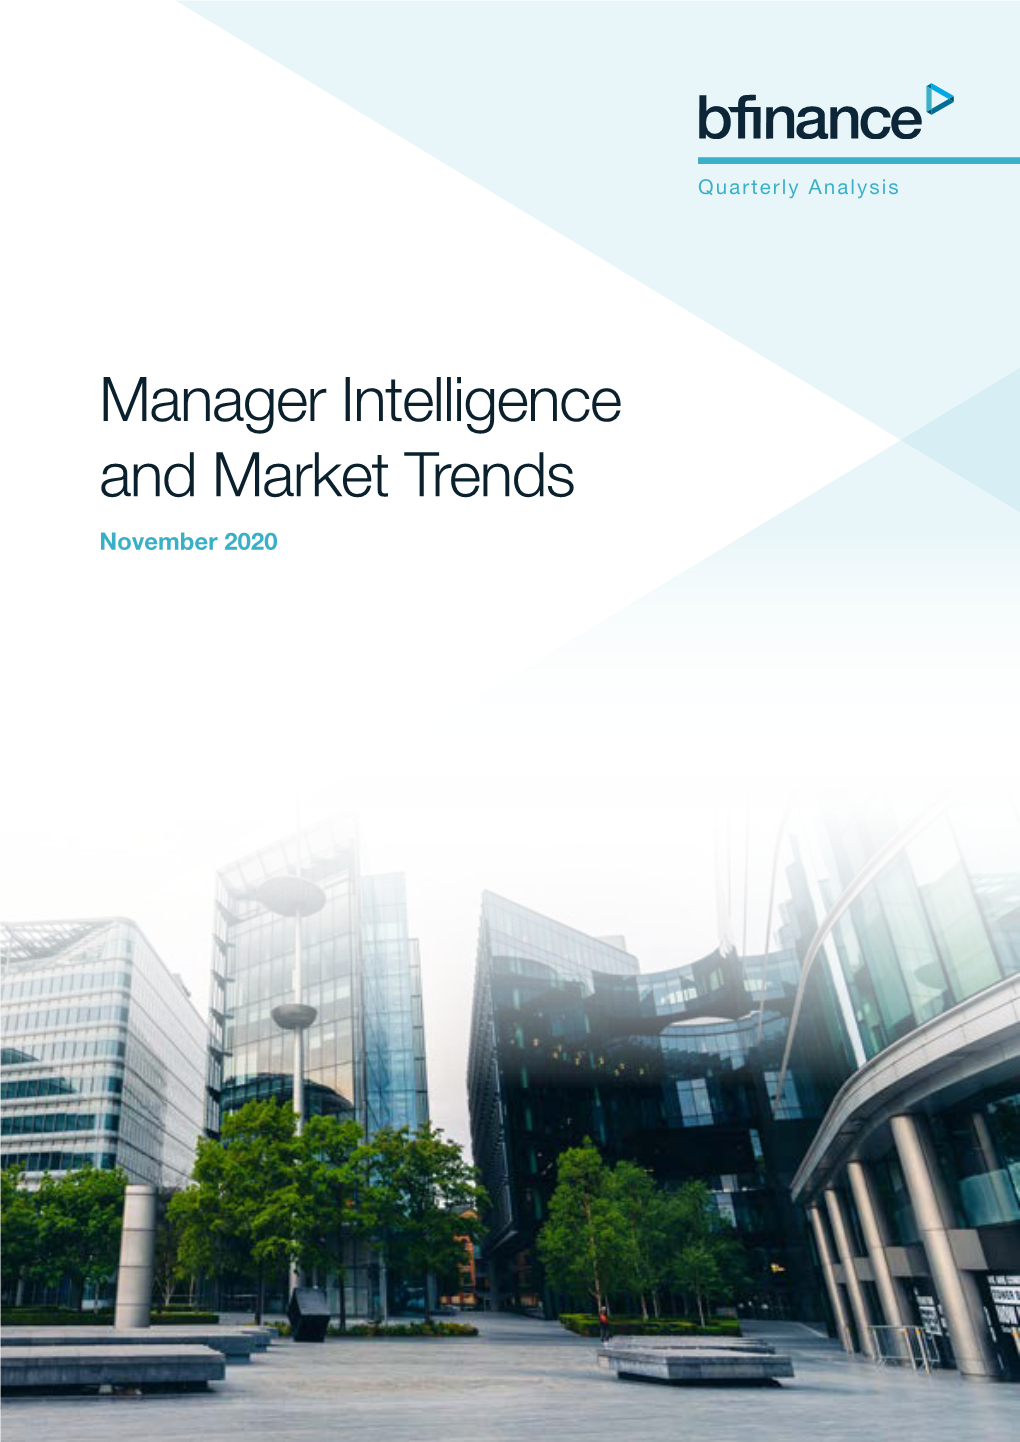 Manager Intelligence and Market Trends November 2020 Contents